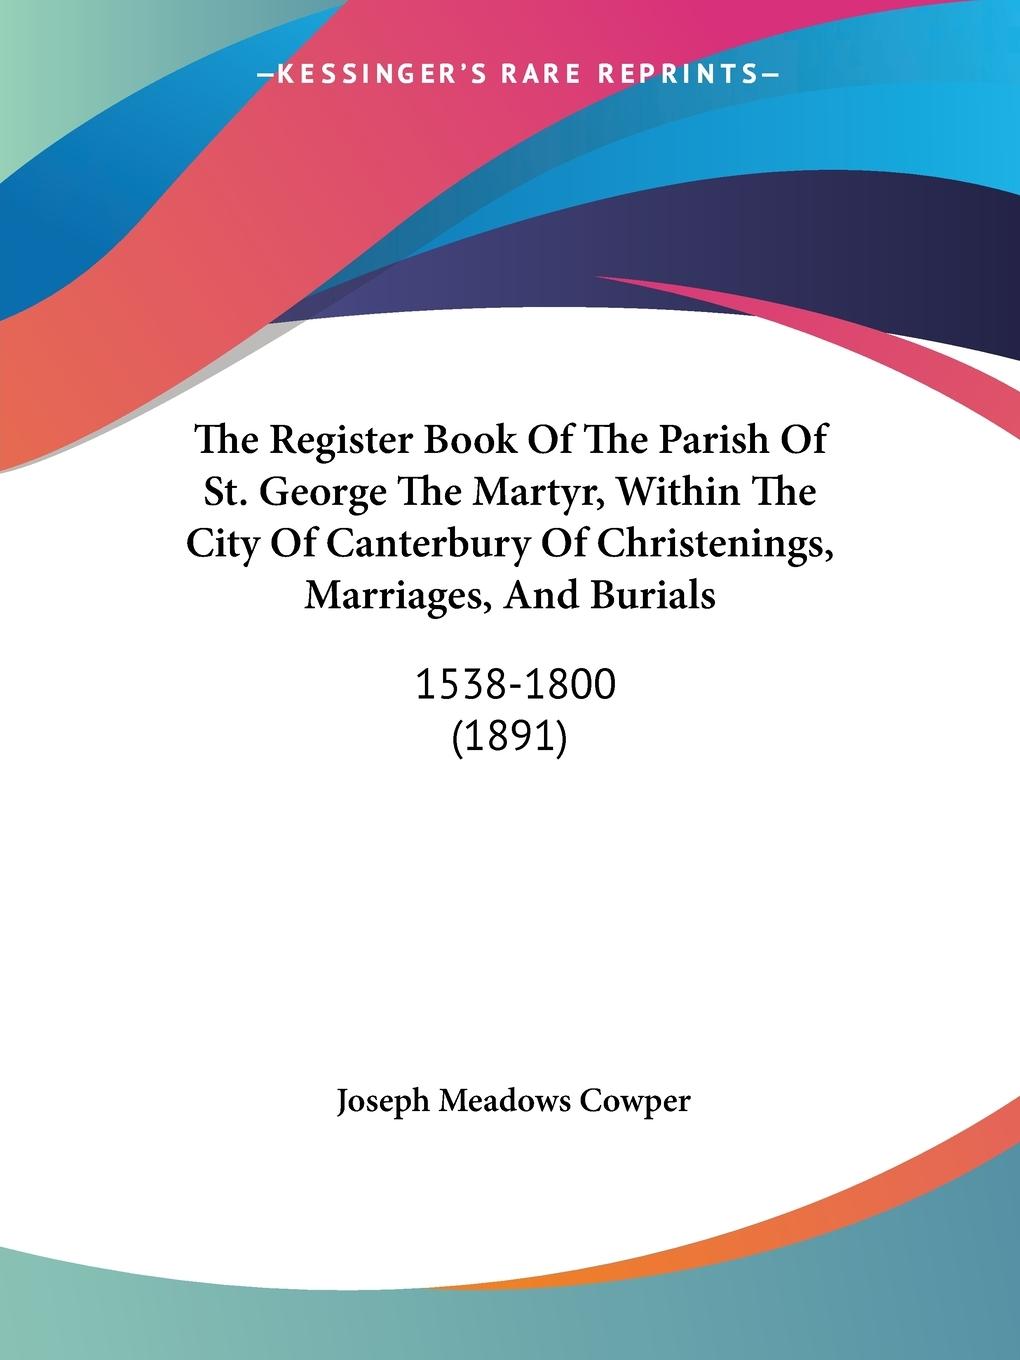 The Register Book Of The Parish Of St. George The Martyr, Within The City Of Canterbury Of Christenings, Marriages, And Burials